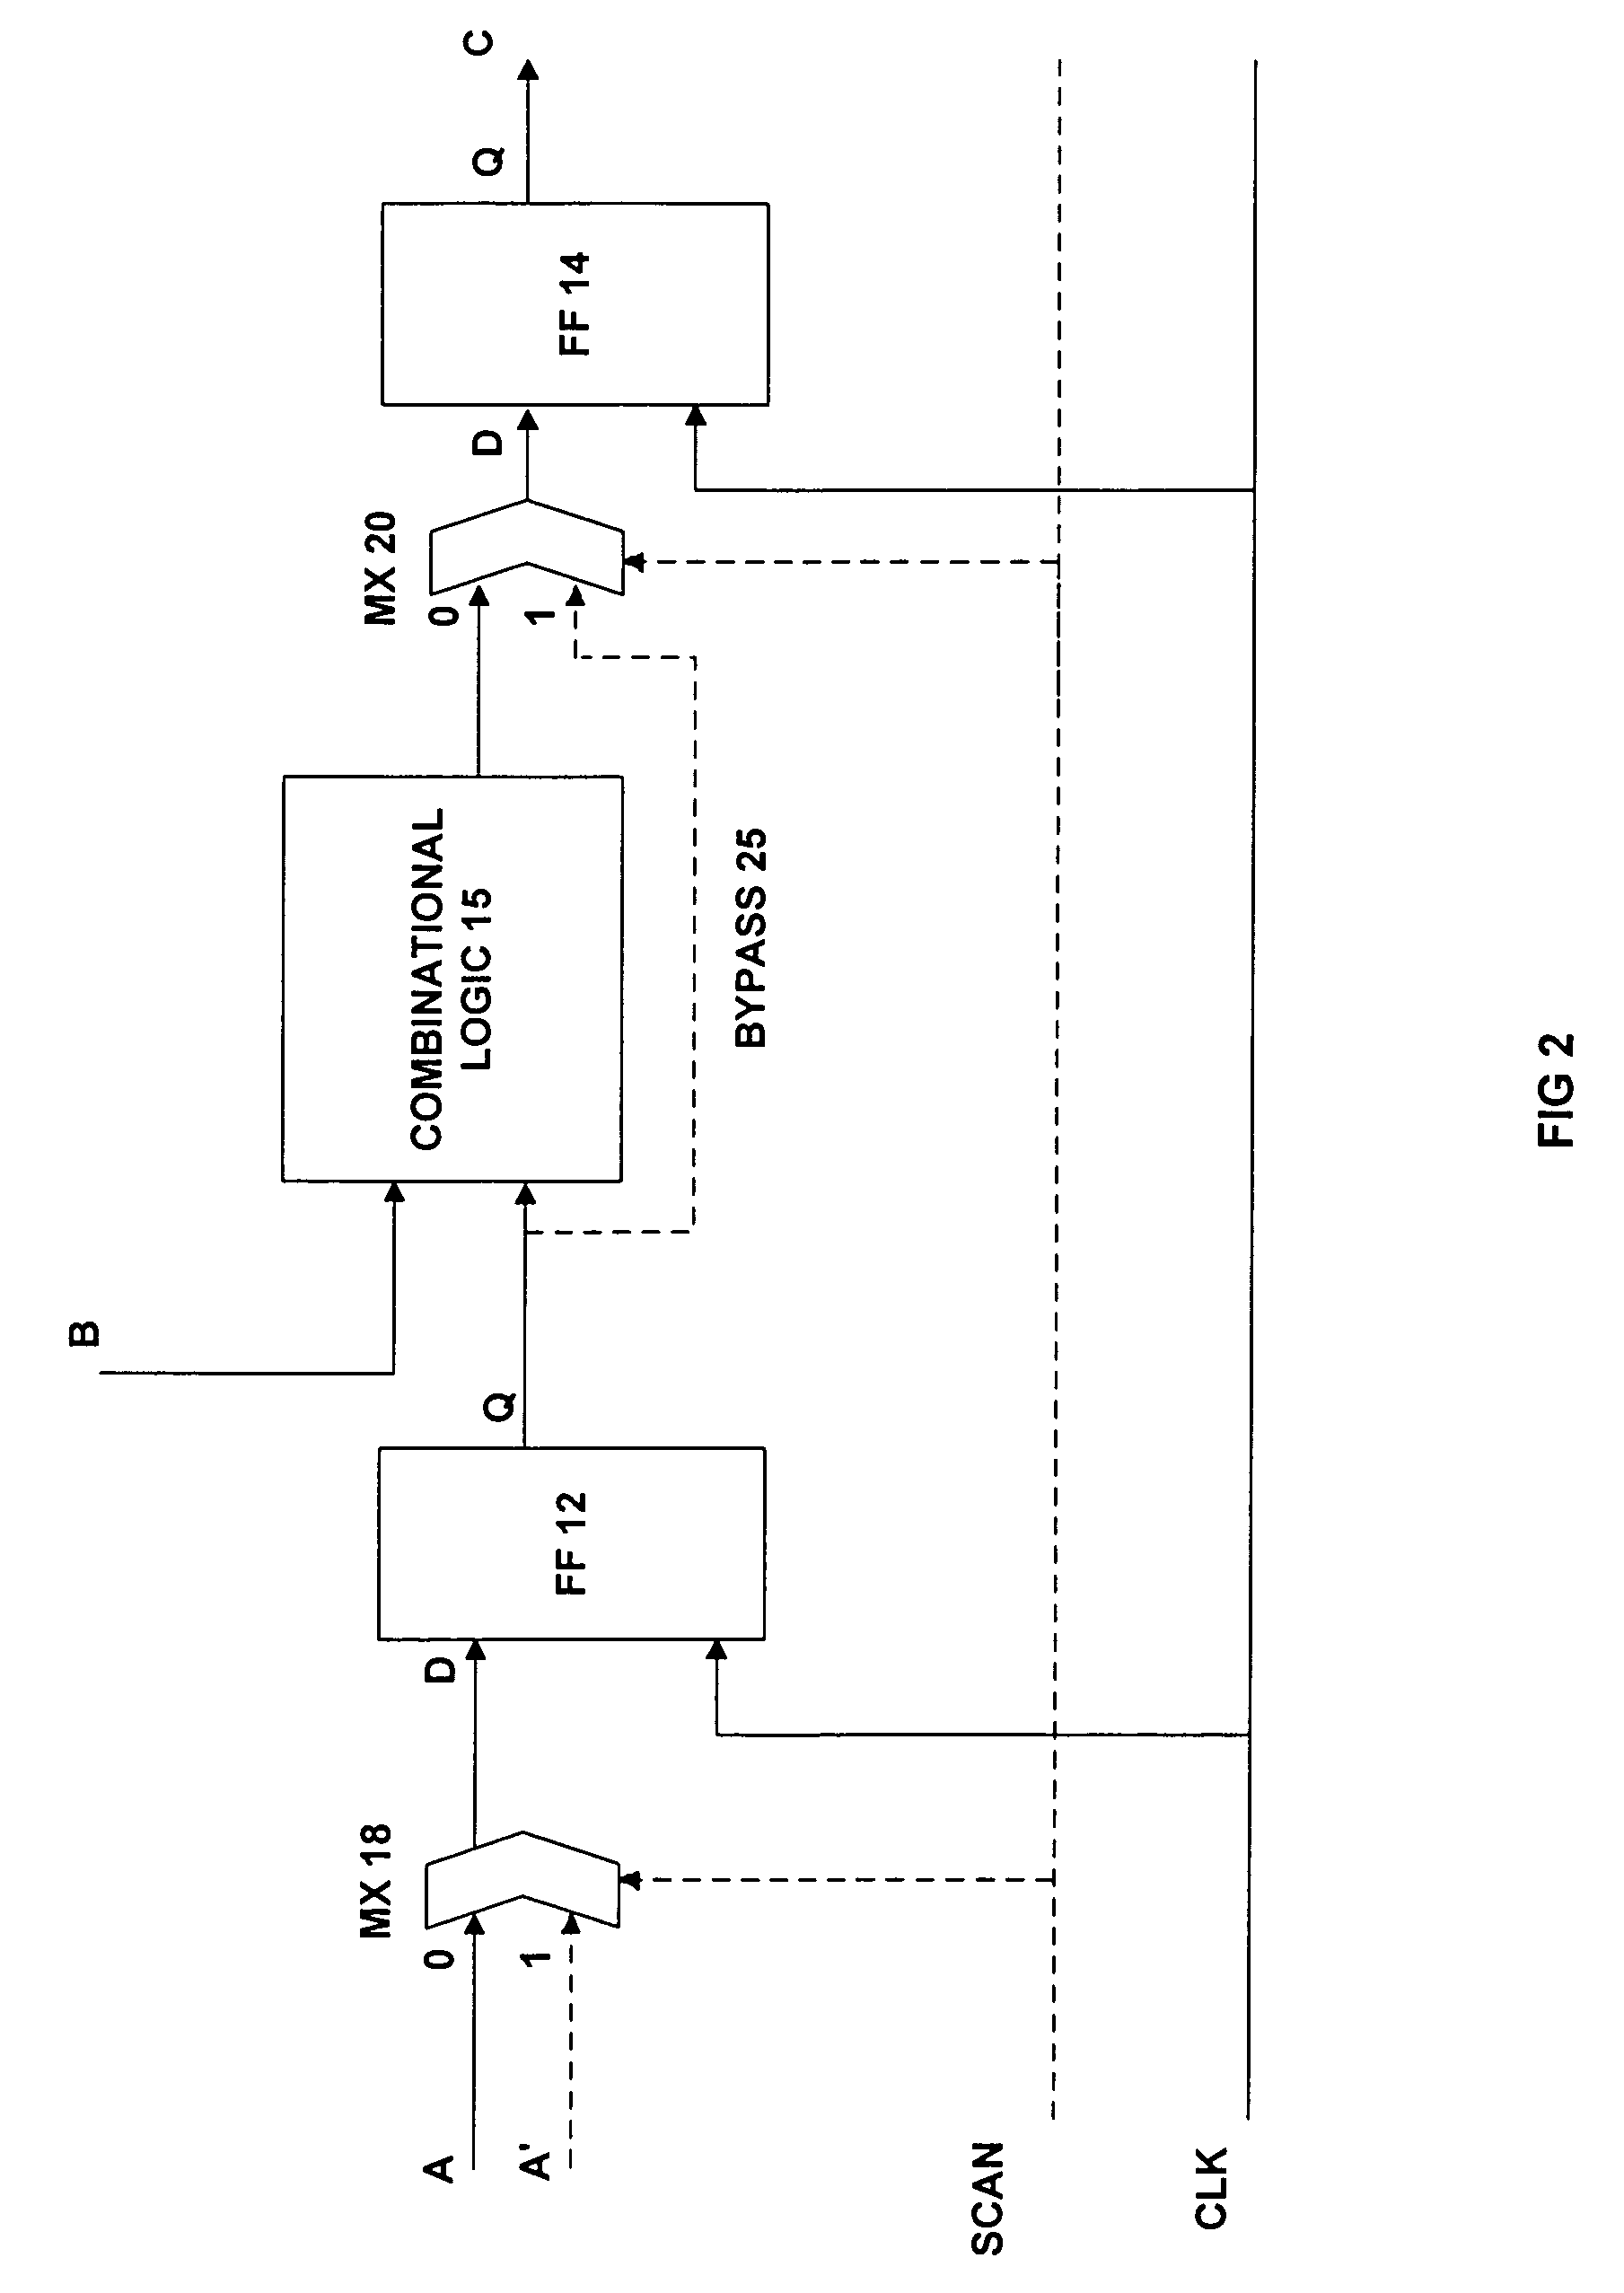 Semiconductor device and method and apparatus for testing such a device